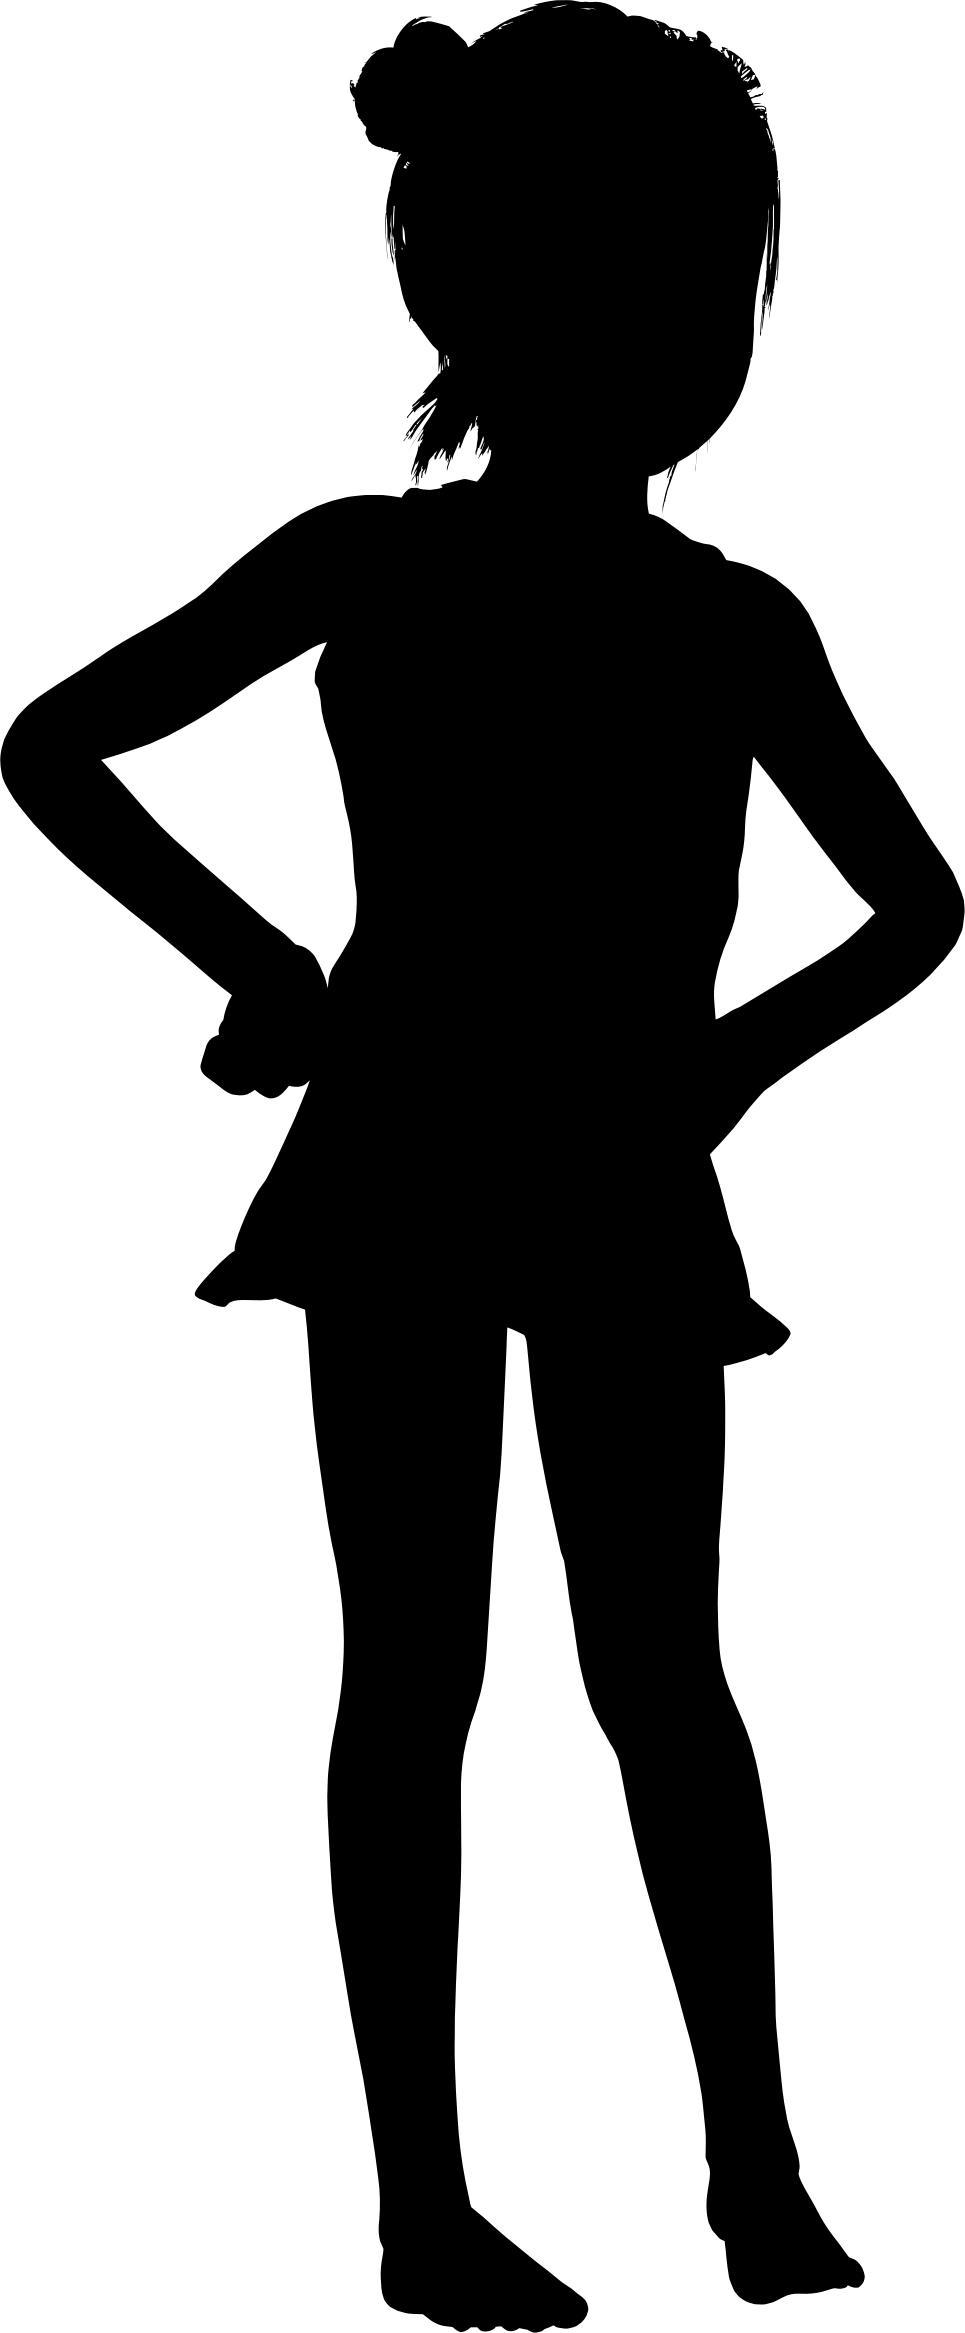 Girl With Hands On Hips Silhouette png transparent